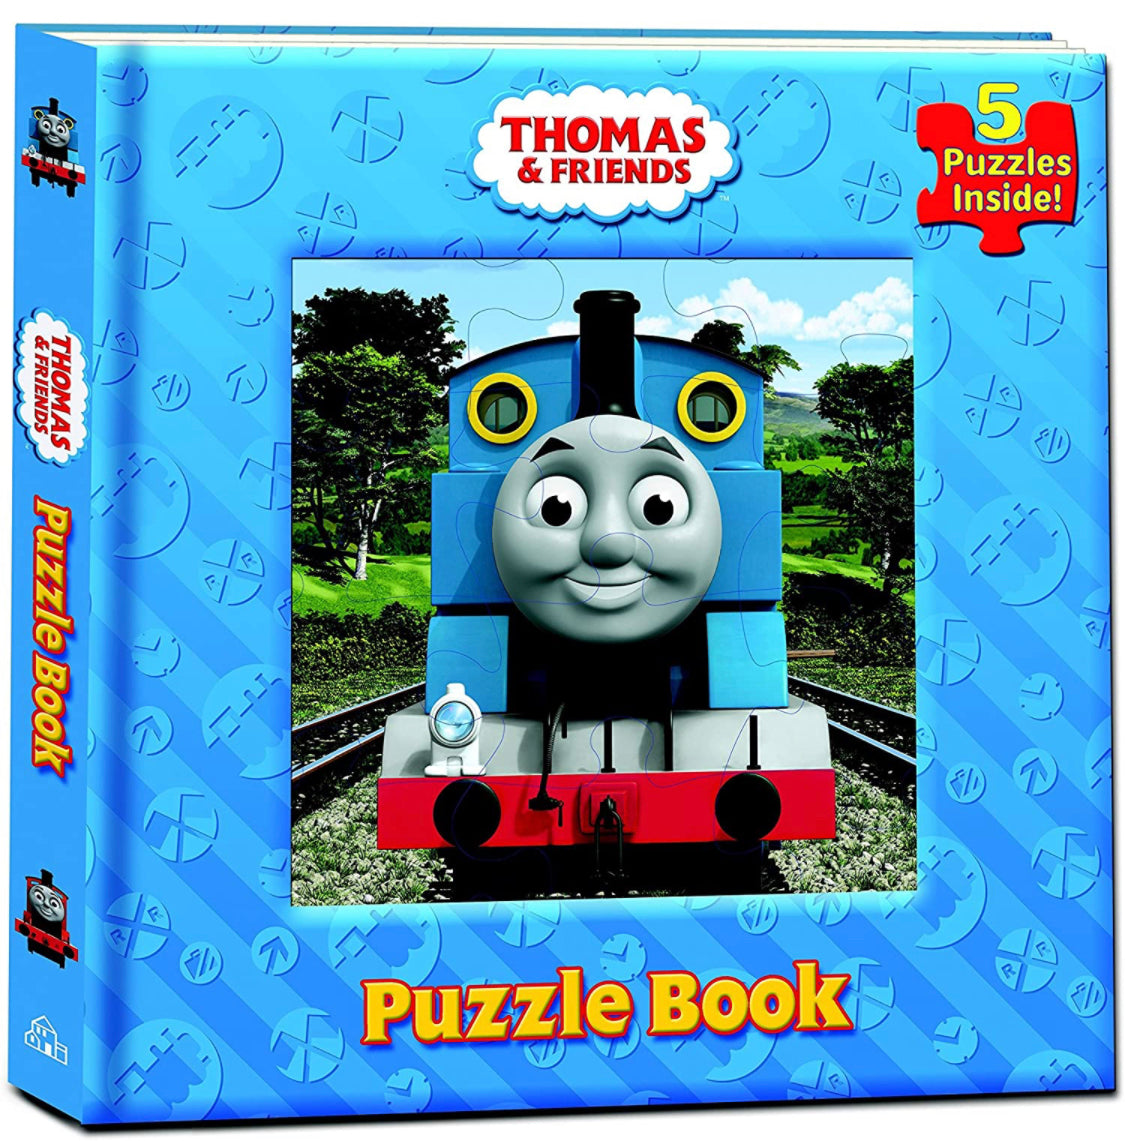 Thomas and Friends puzzle book!